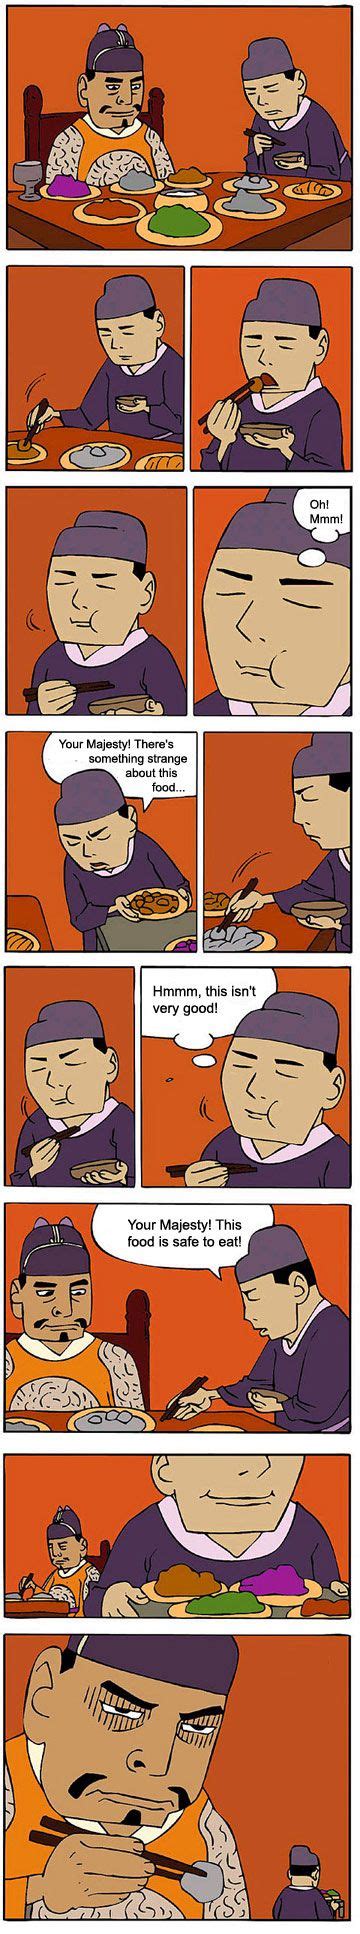 16 best korean adult funny comic images on pinterest ha ha funny stuff and funny things